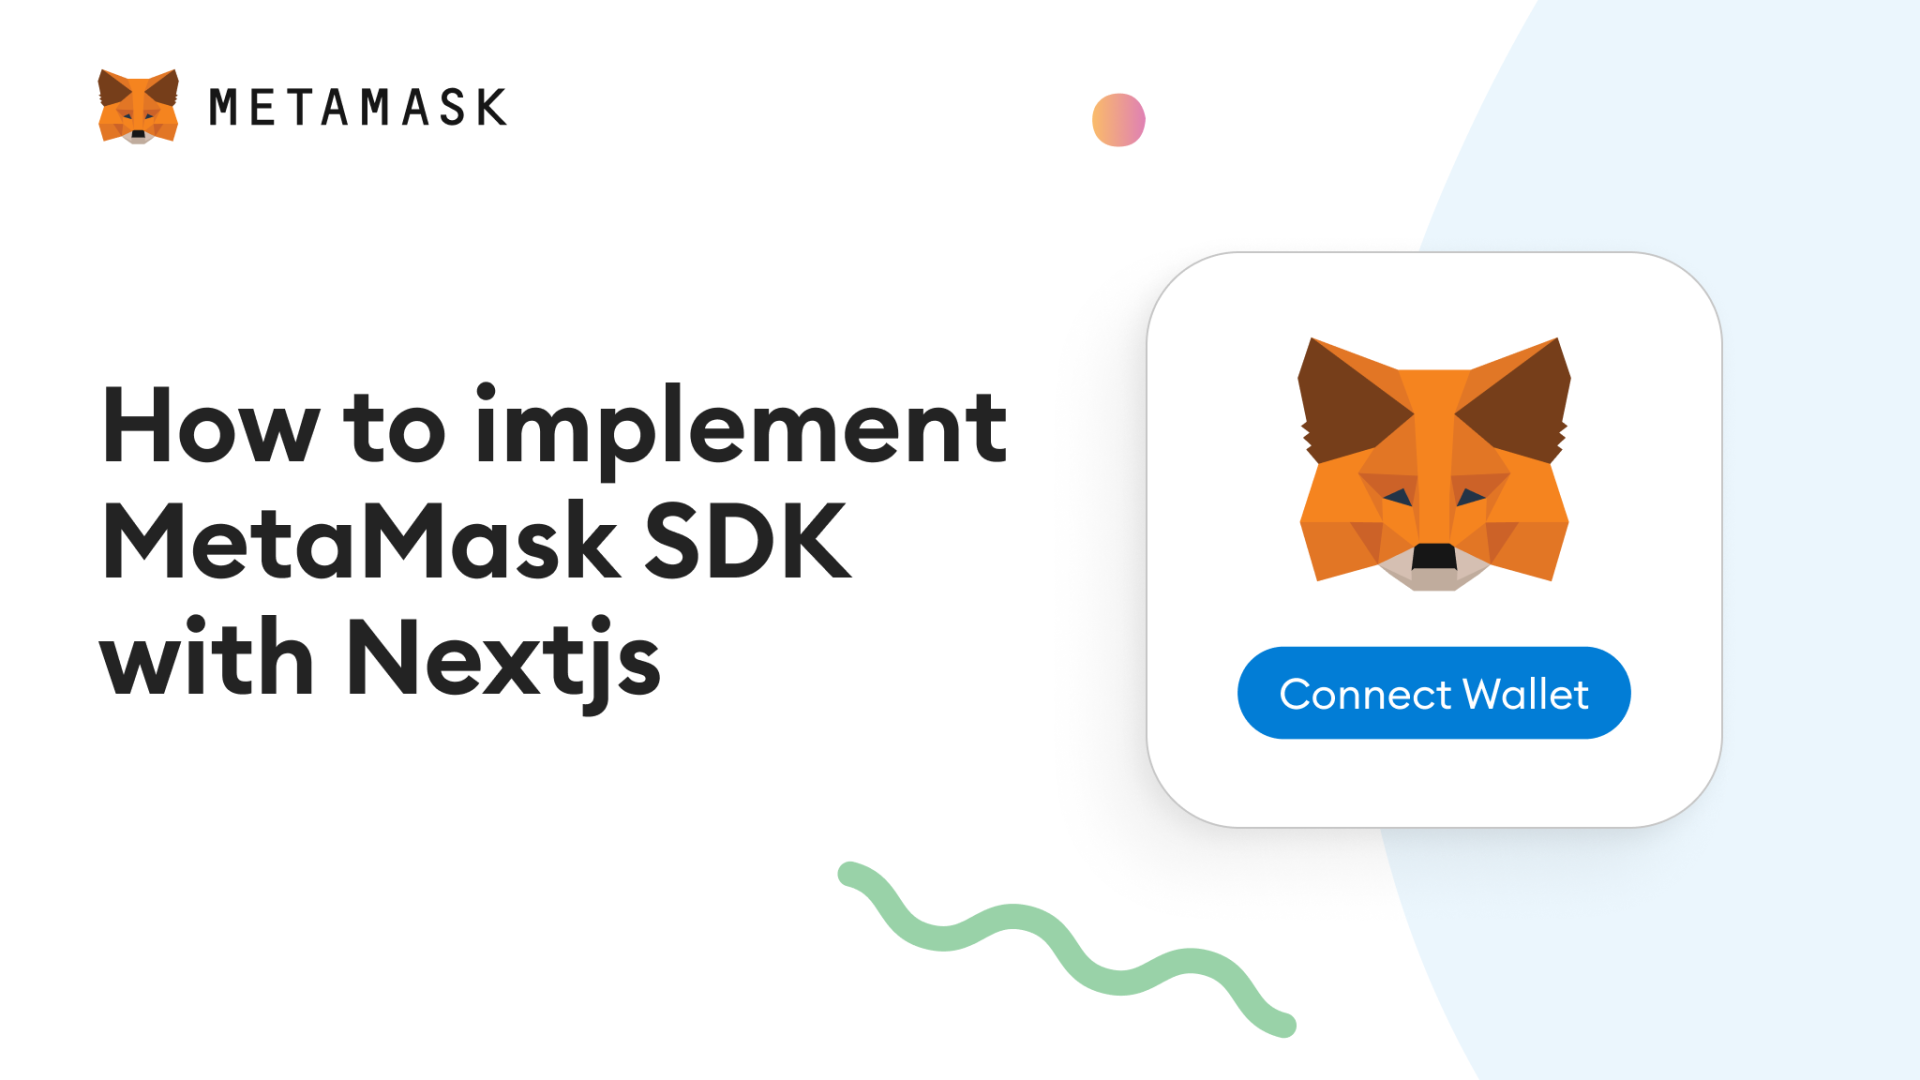 How to Implement MetaMask SDK with Nextjs Image